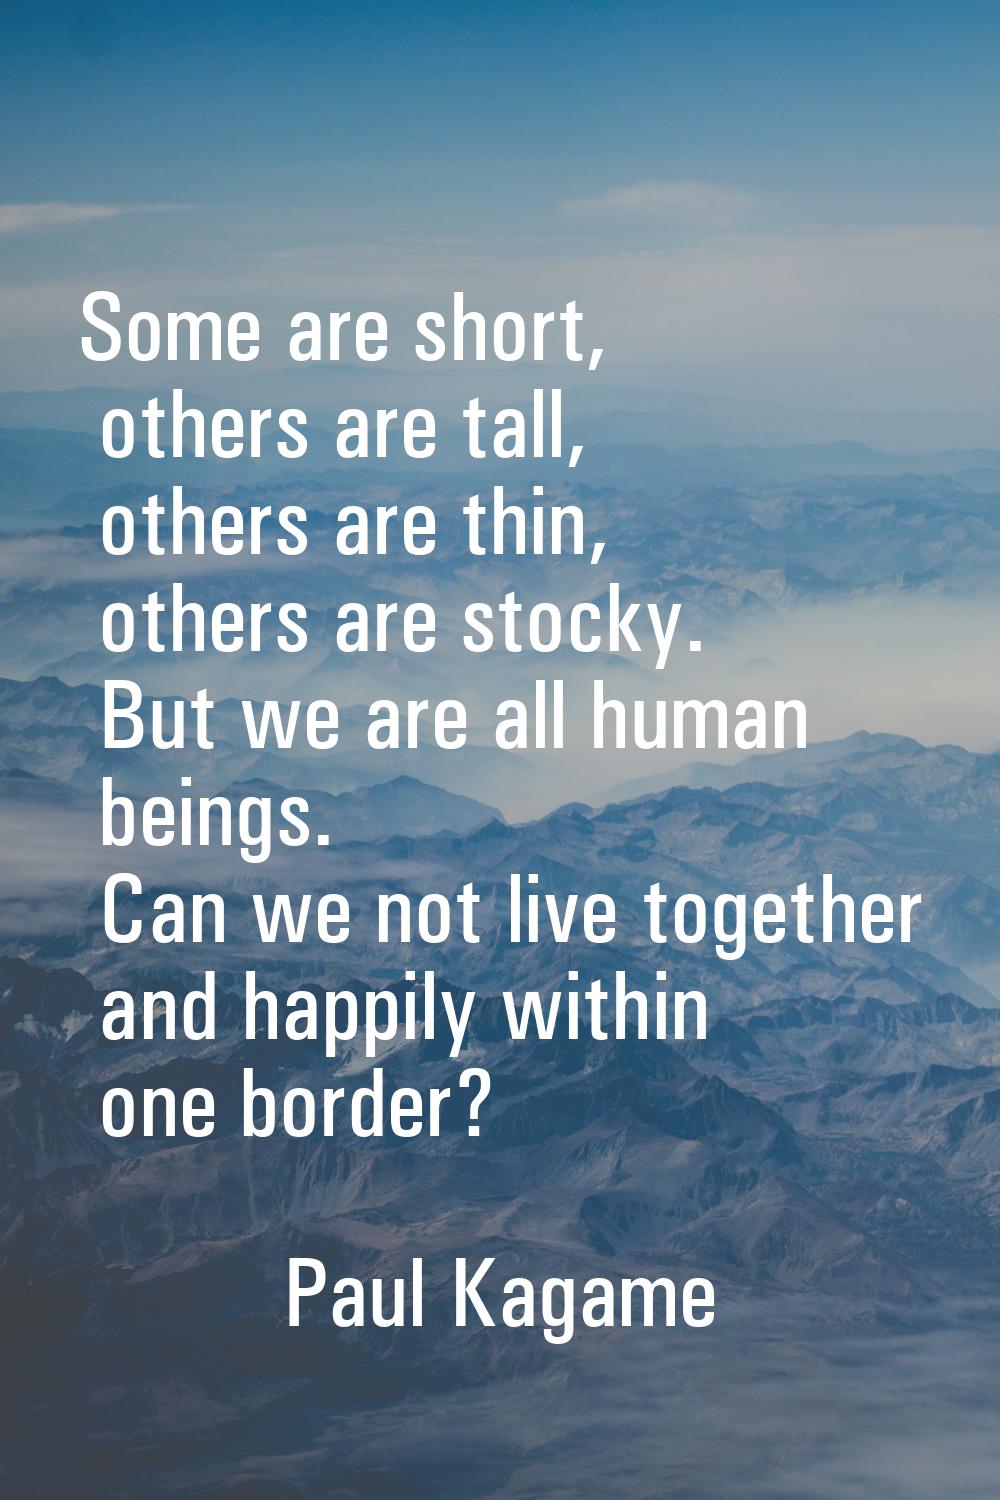 Some are short, others are tall, others are thin, others are stocky. But we are all human beings. C